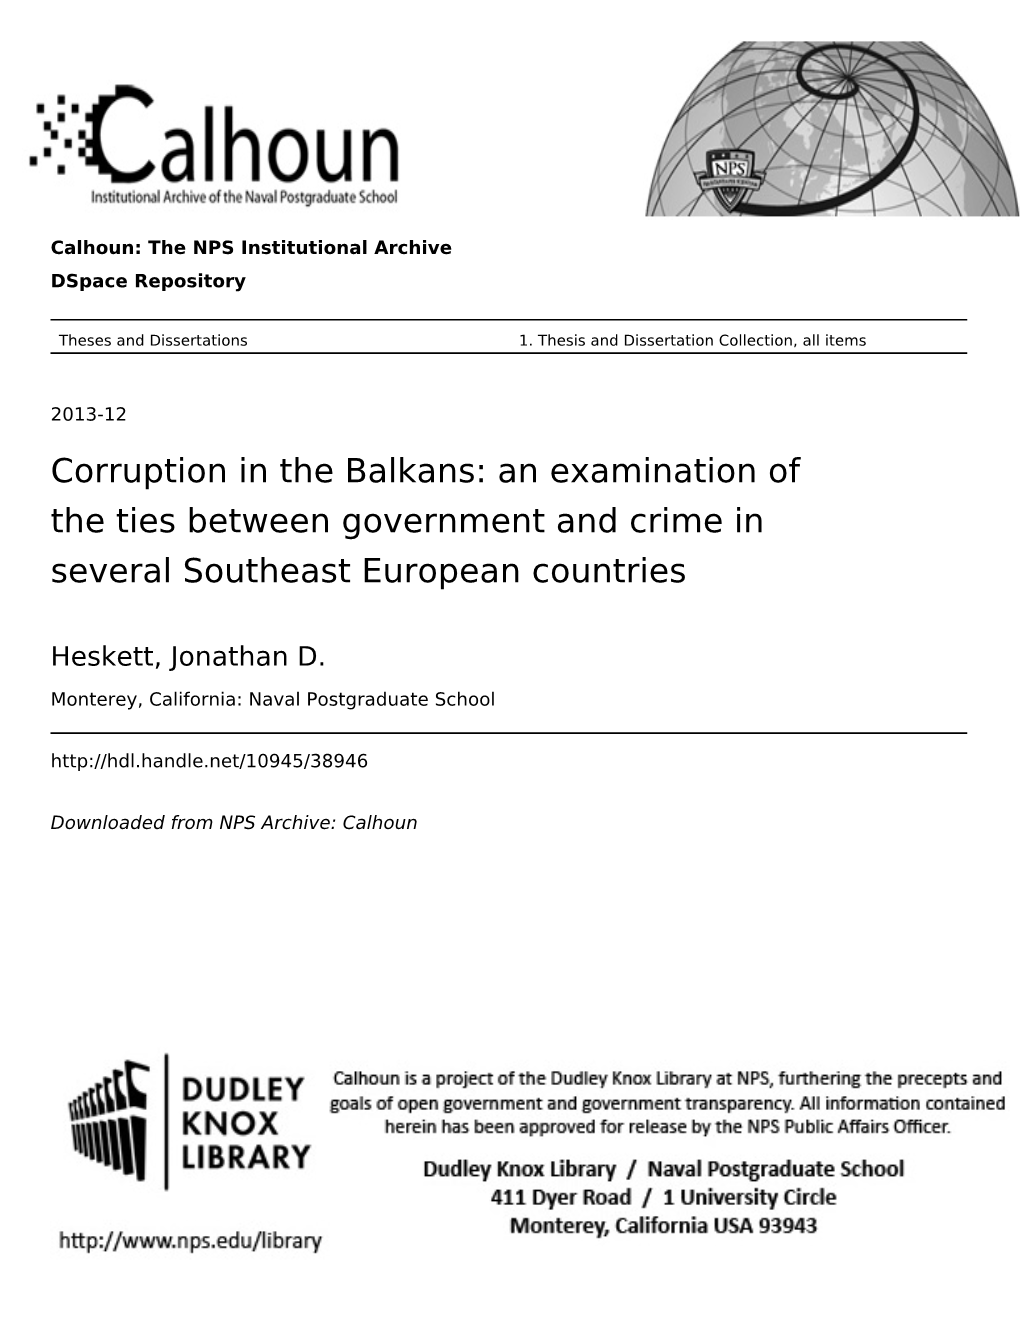 Corruption in the Balkans: an Examination of the Ties Between Government and Crime in Several Southeast European Countries